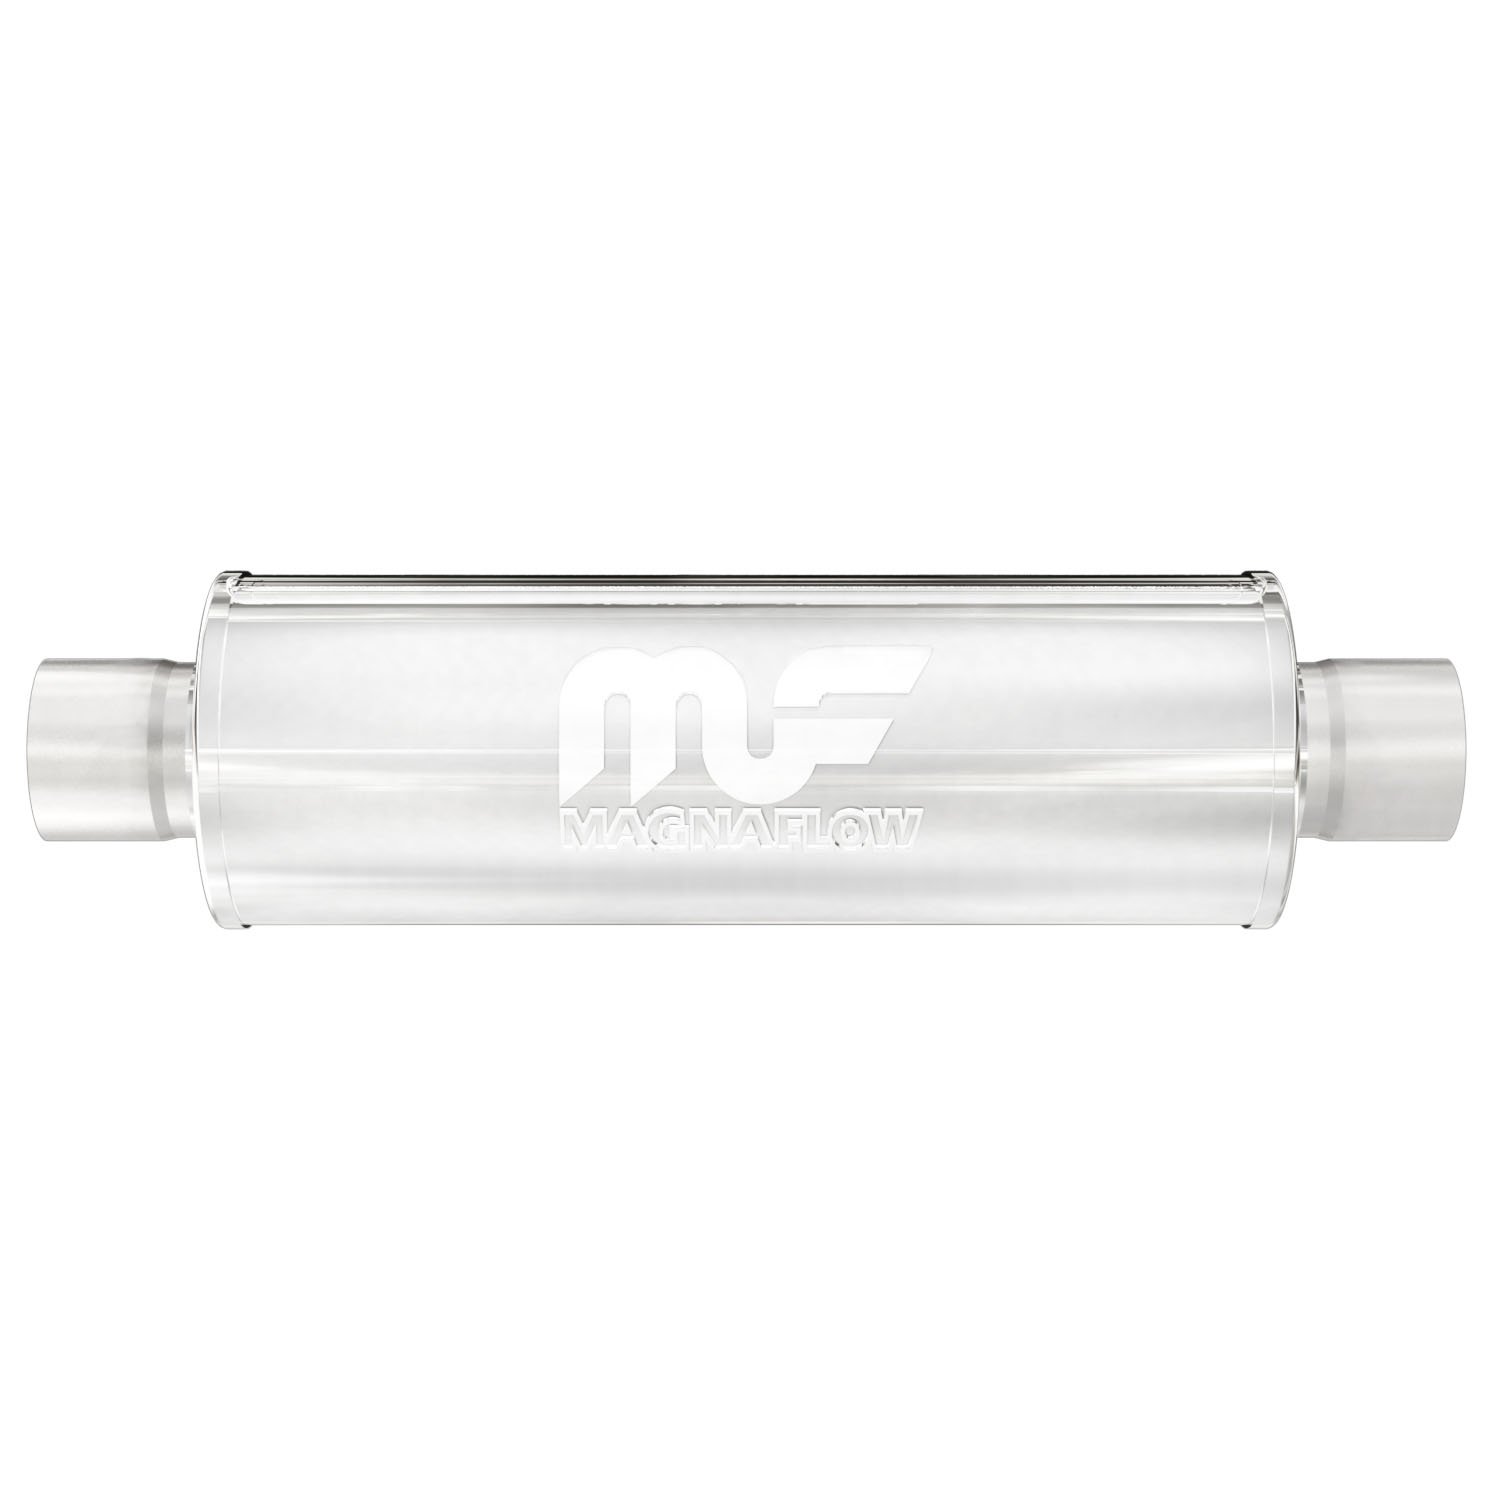 7" Round Muffler, Center In/Center Out: 2", Body Length: 14", Overall Length: 20", Core Size: 2.5" 4" Round Muffler, Center In/C